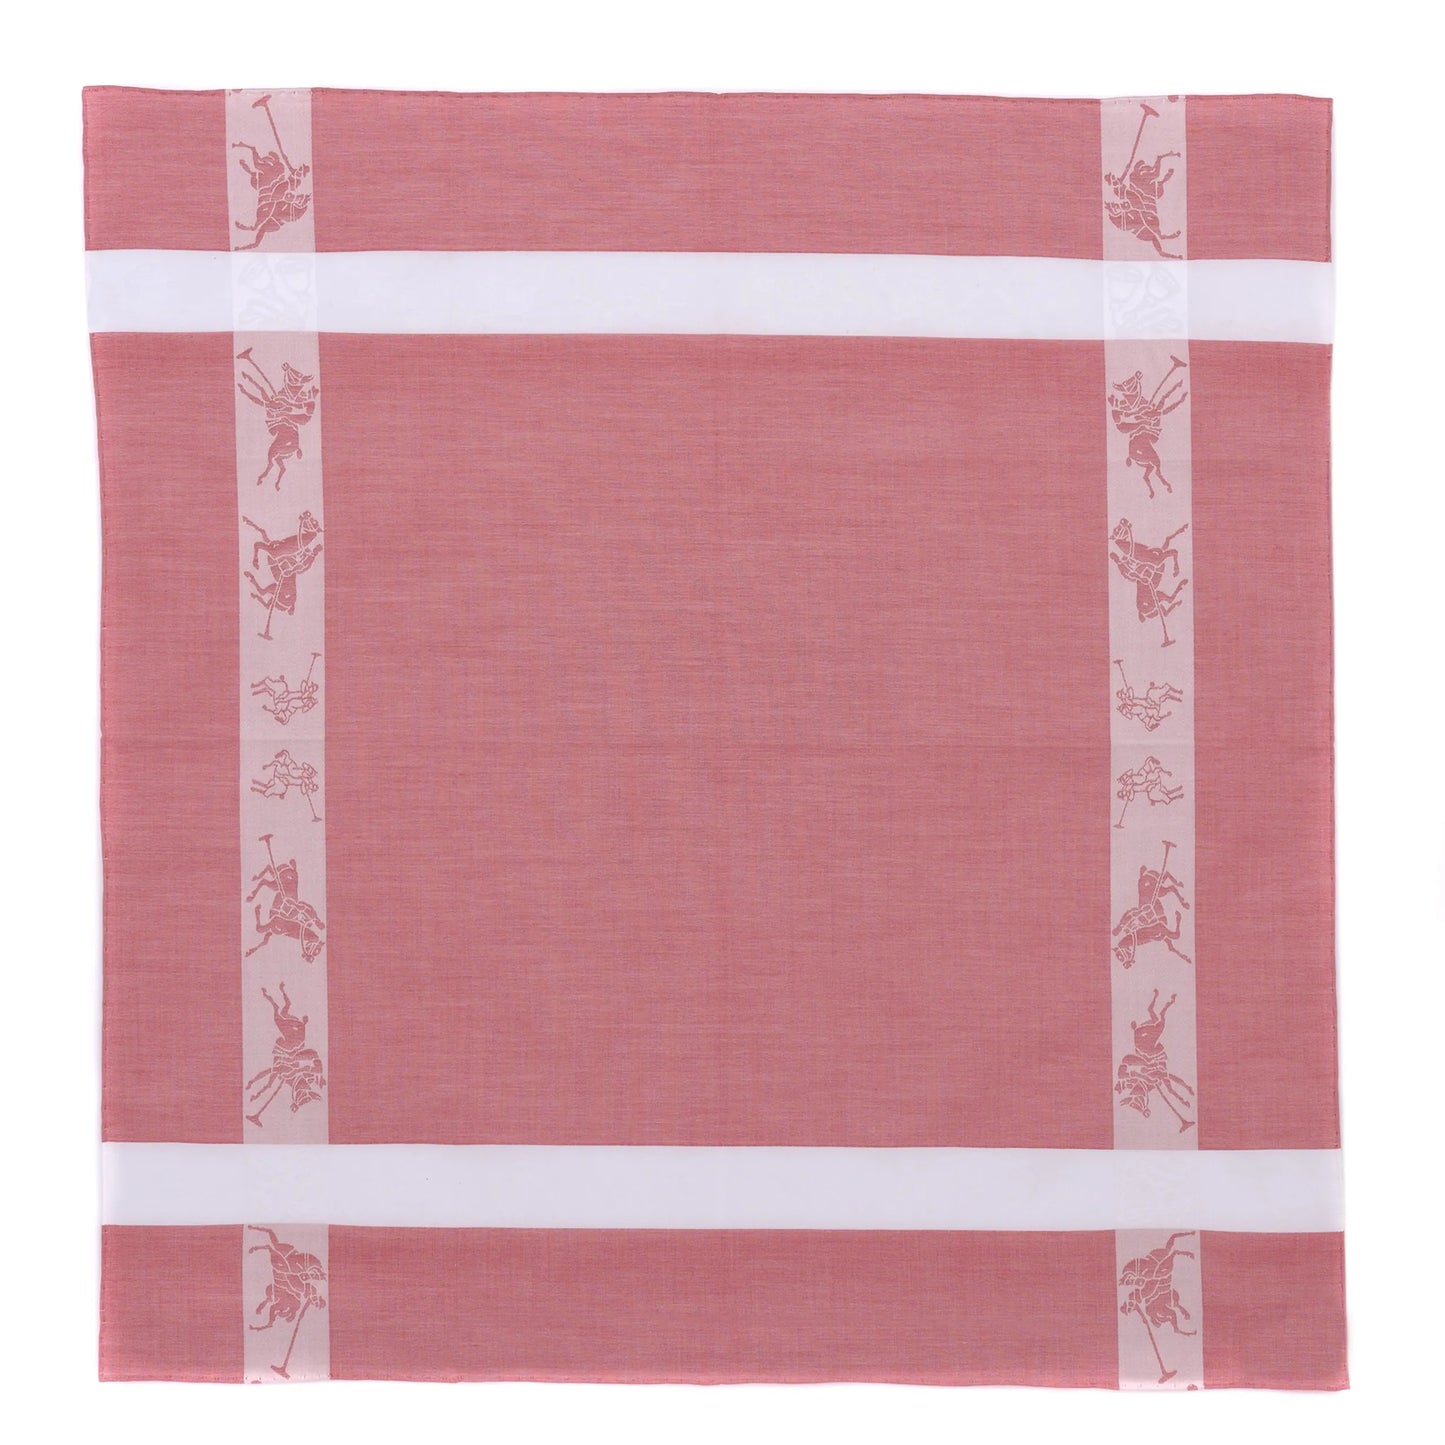 Printed Cotton Pocket Square in Pink